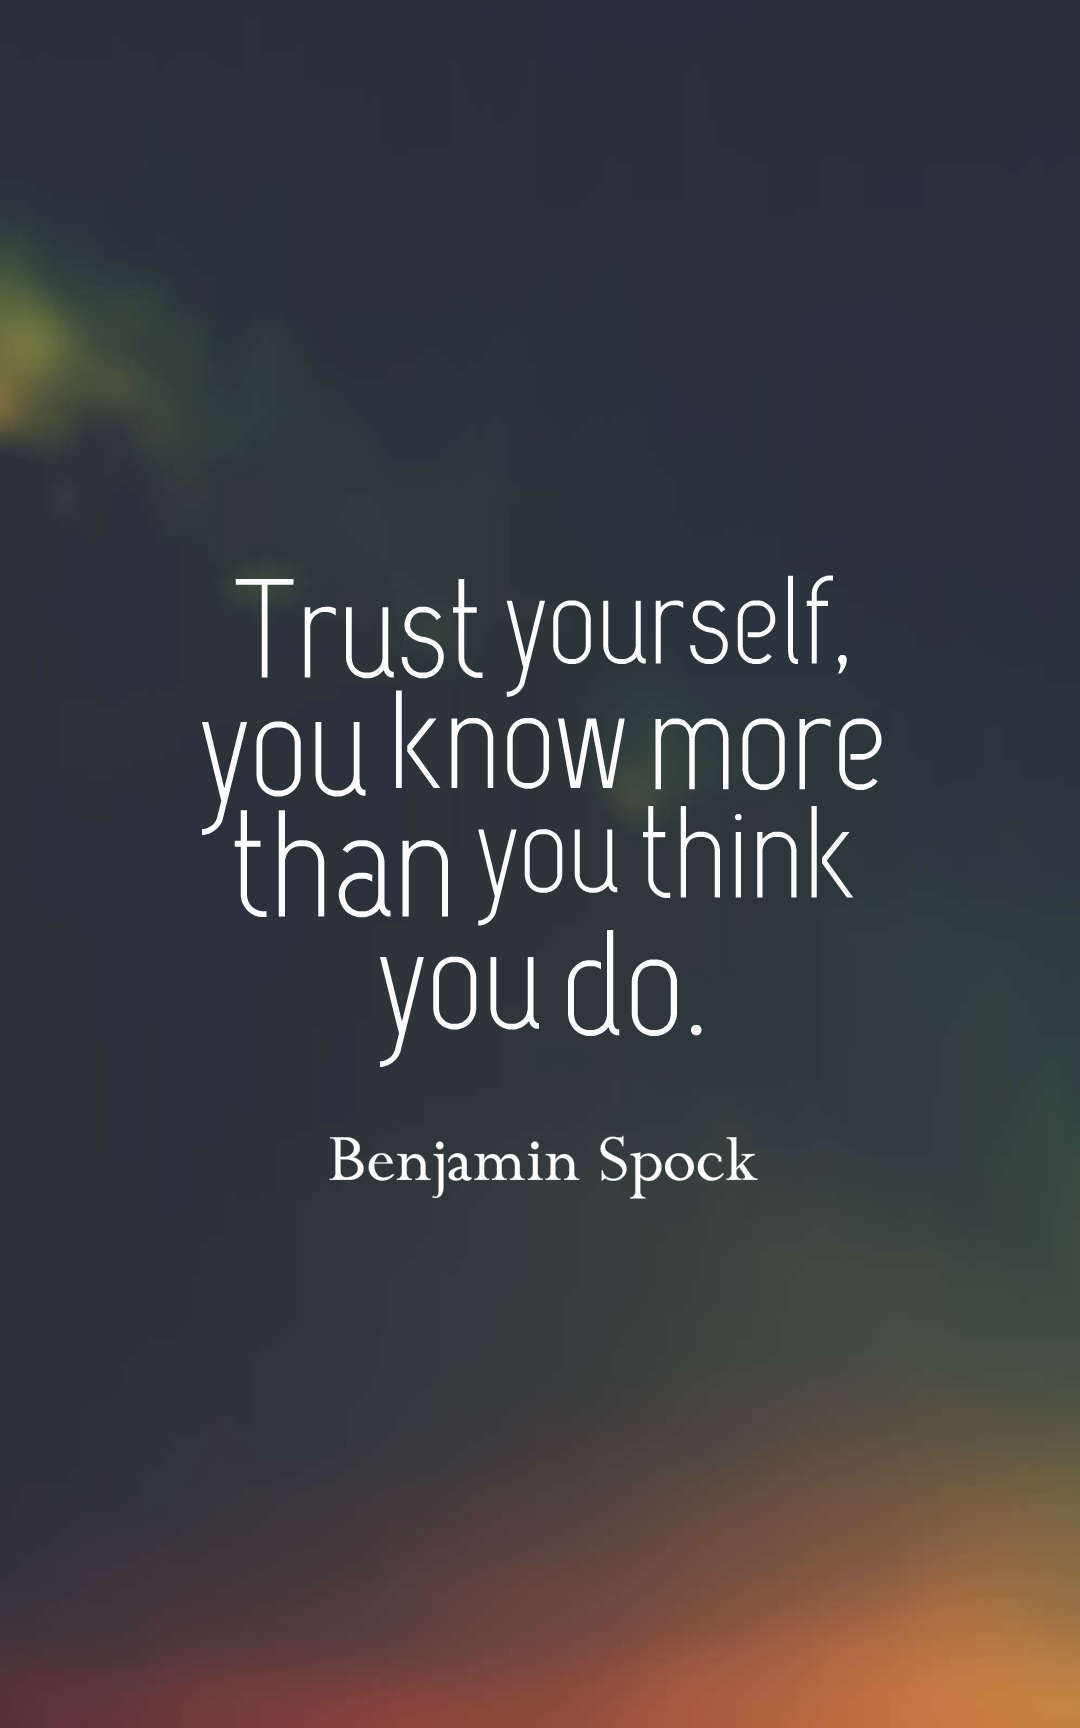 Trust yourself, you know more than you think you do.